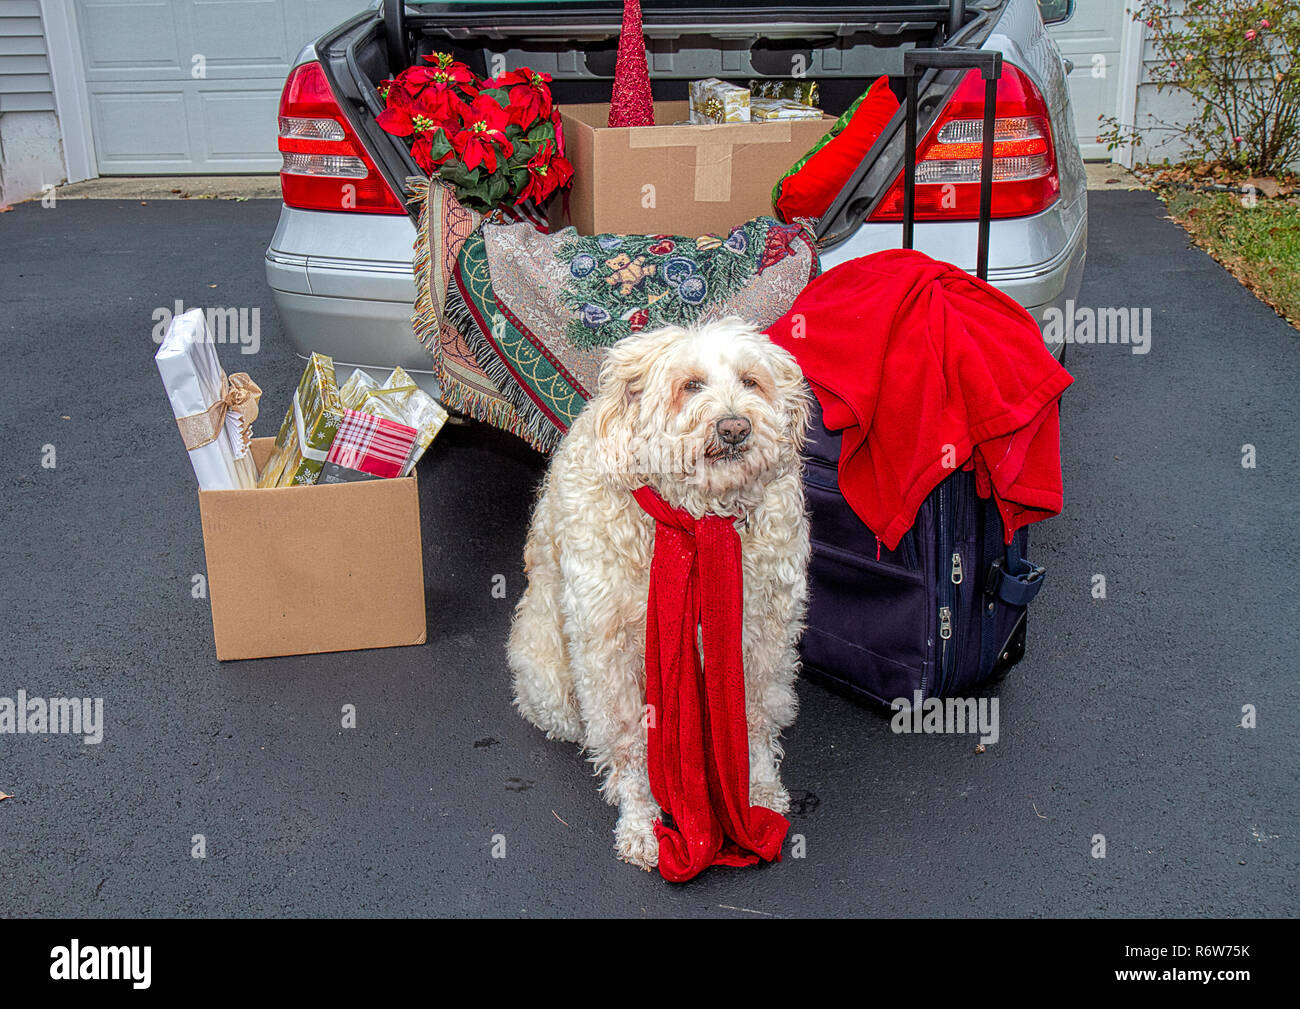 Trunk of car packed for traveling over the Christmas Holidays.   Filled with luggage,gifts, poinsettias and more.  Large white dog waits patiently. Stock Photo